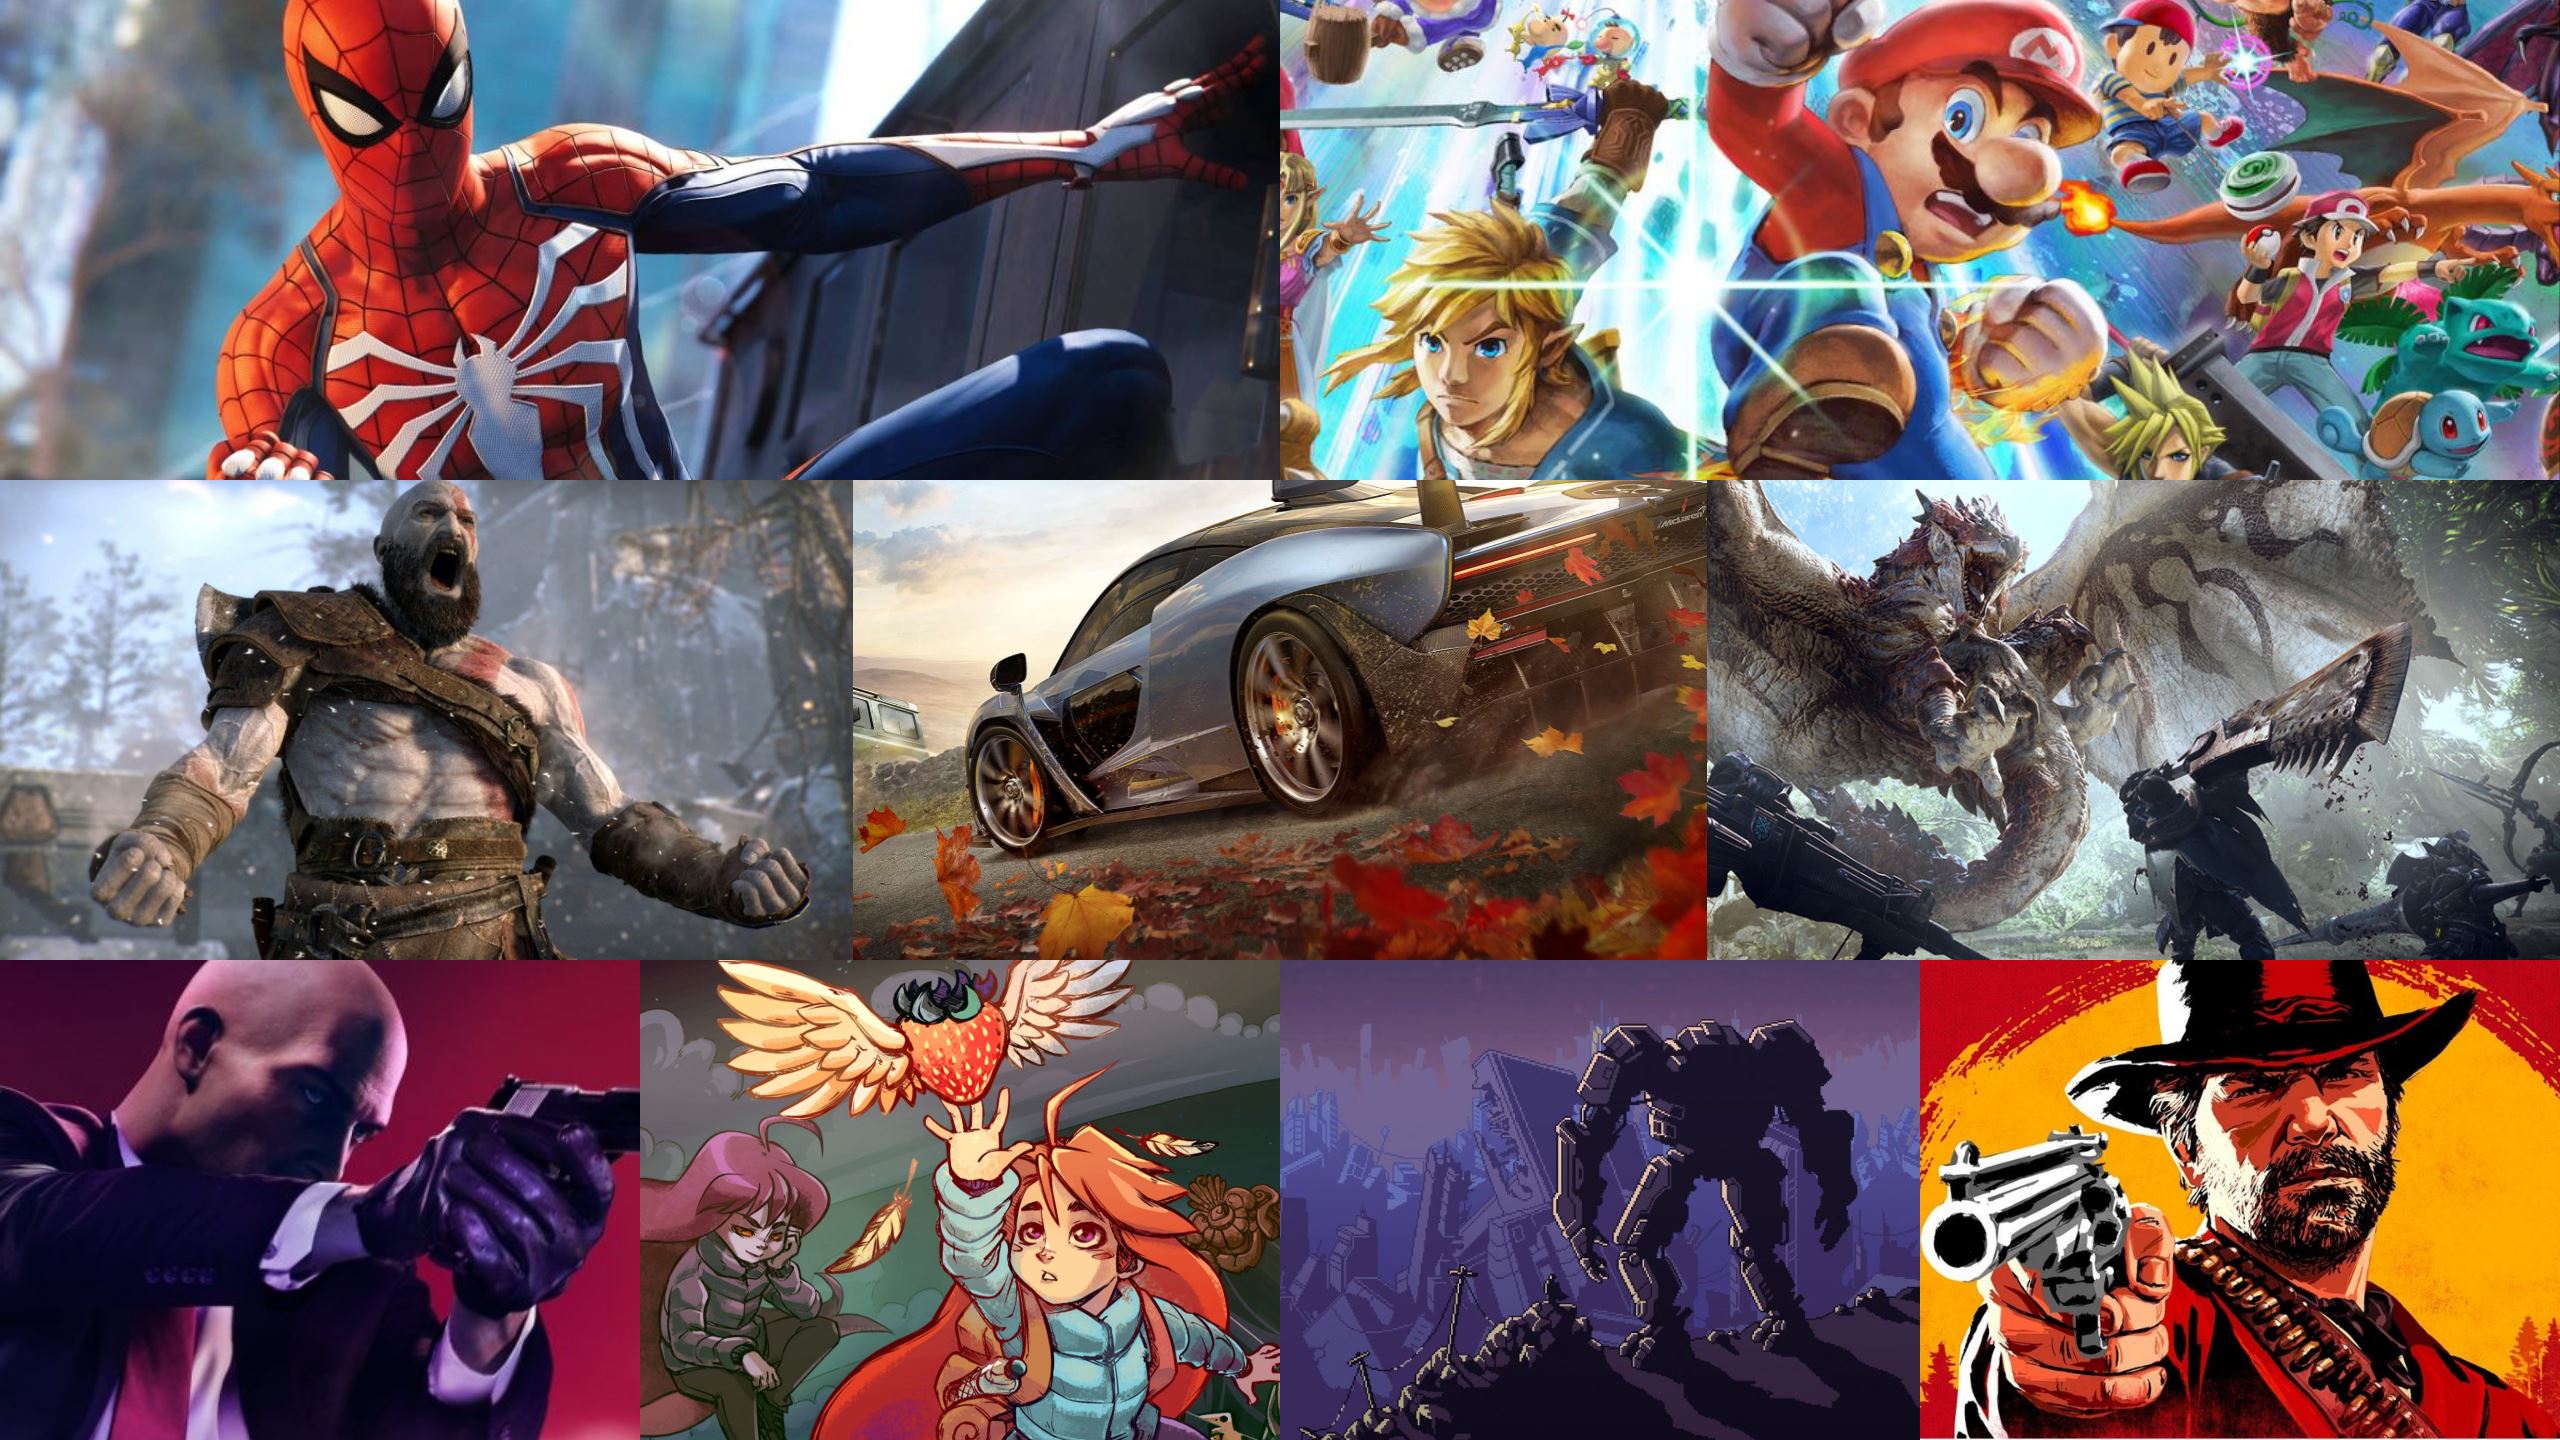 Game of the Year: The Best Video Games of 2018, by Henry/Myriad